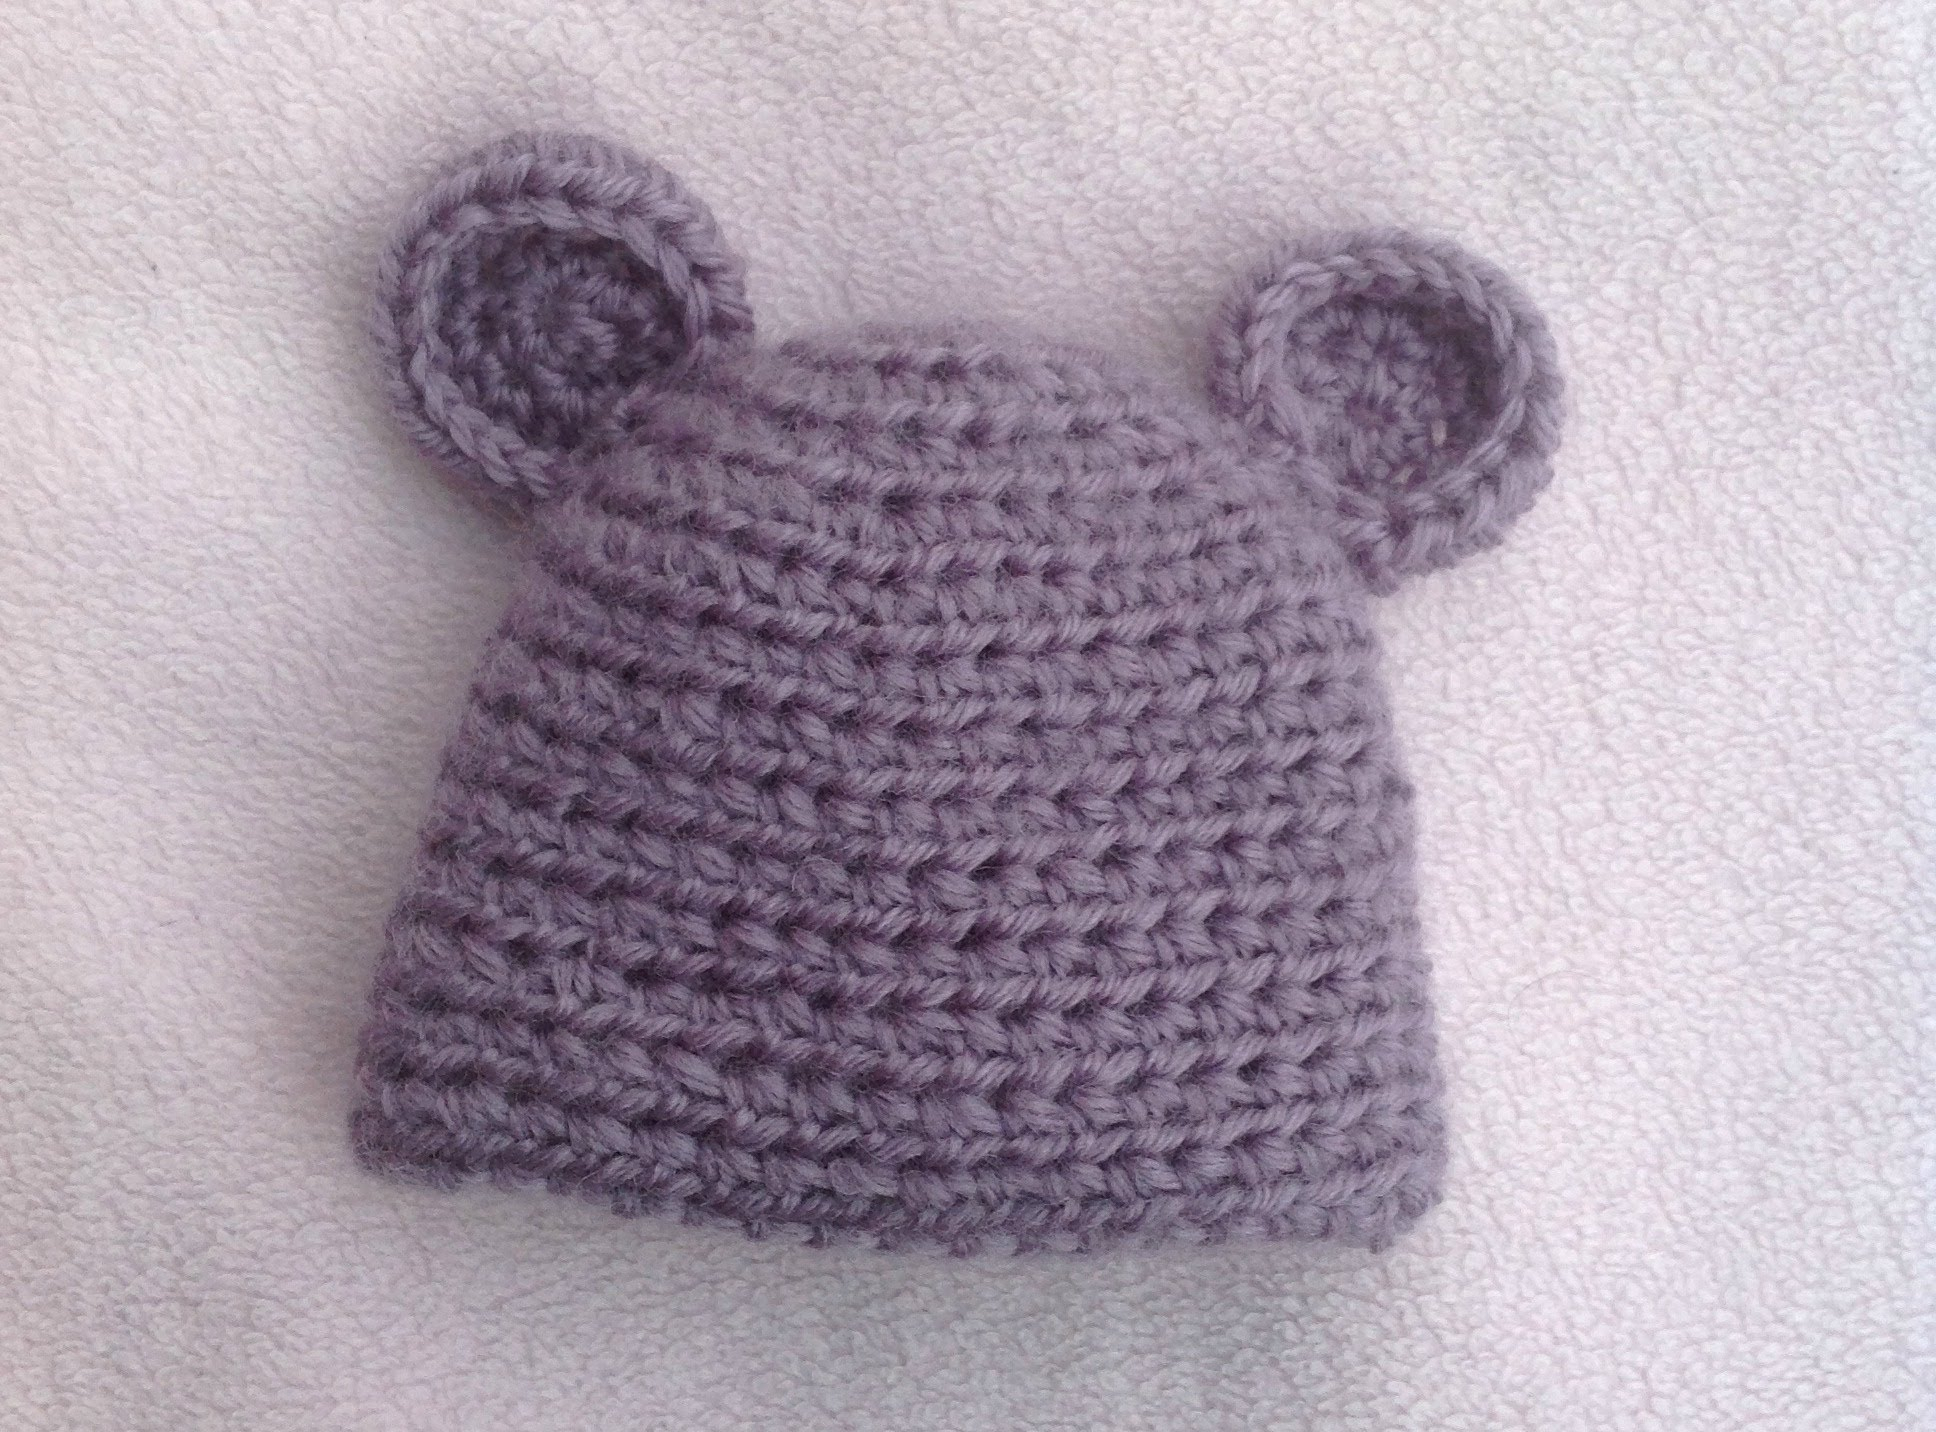 Baby Crochet Hat Pattern Knitting Patterns Hoodie How To Crochet A Very Easy Ba Hat